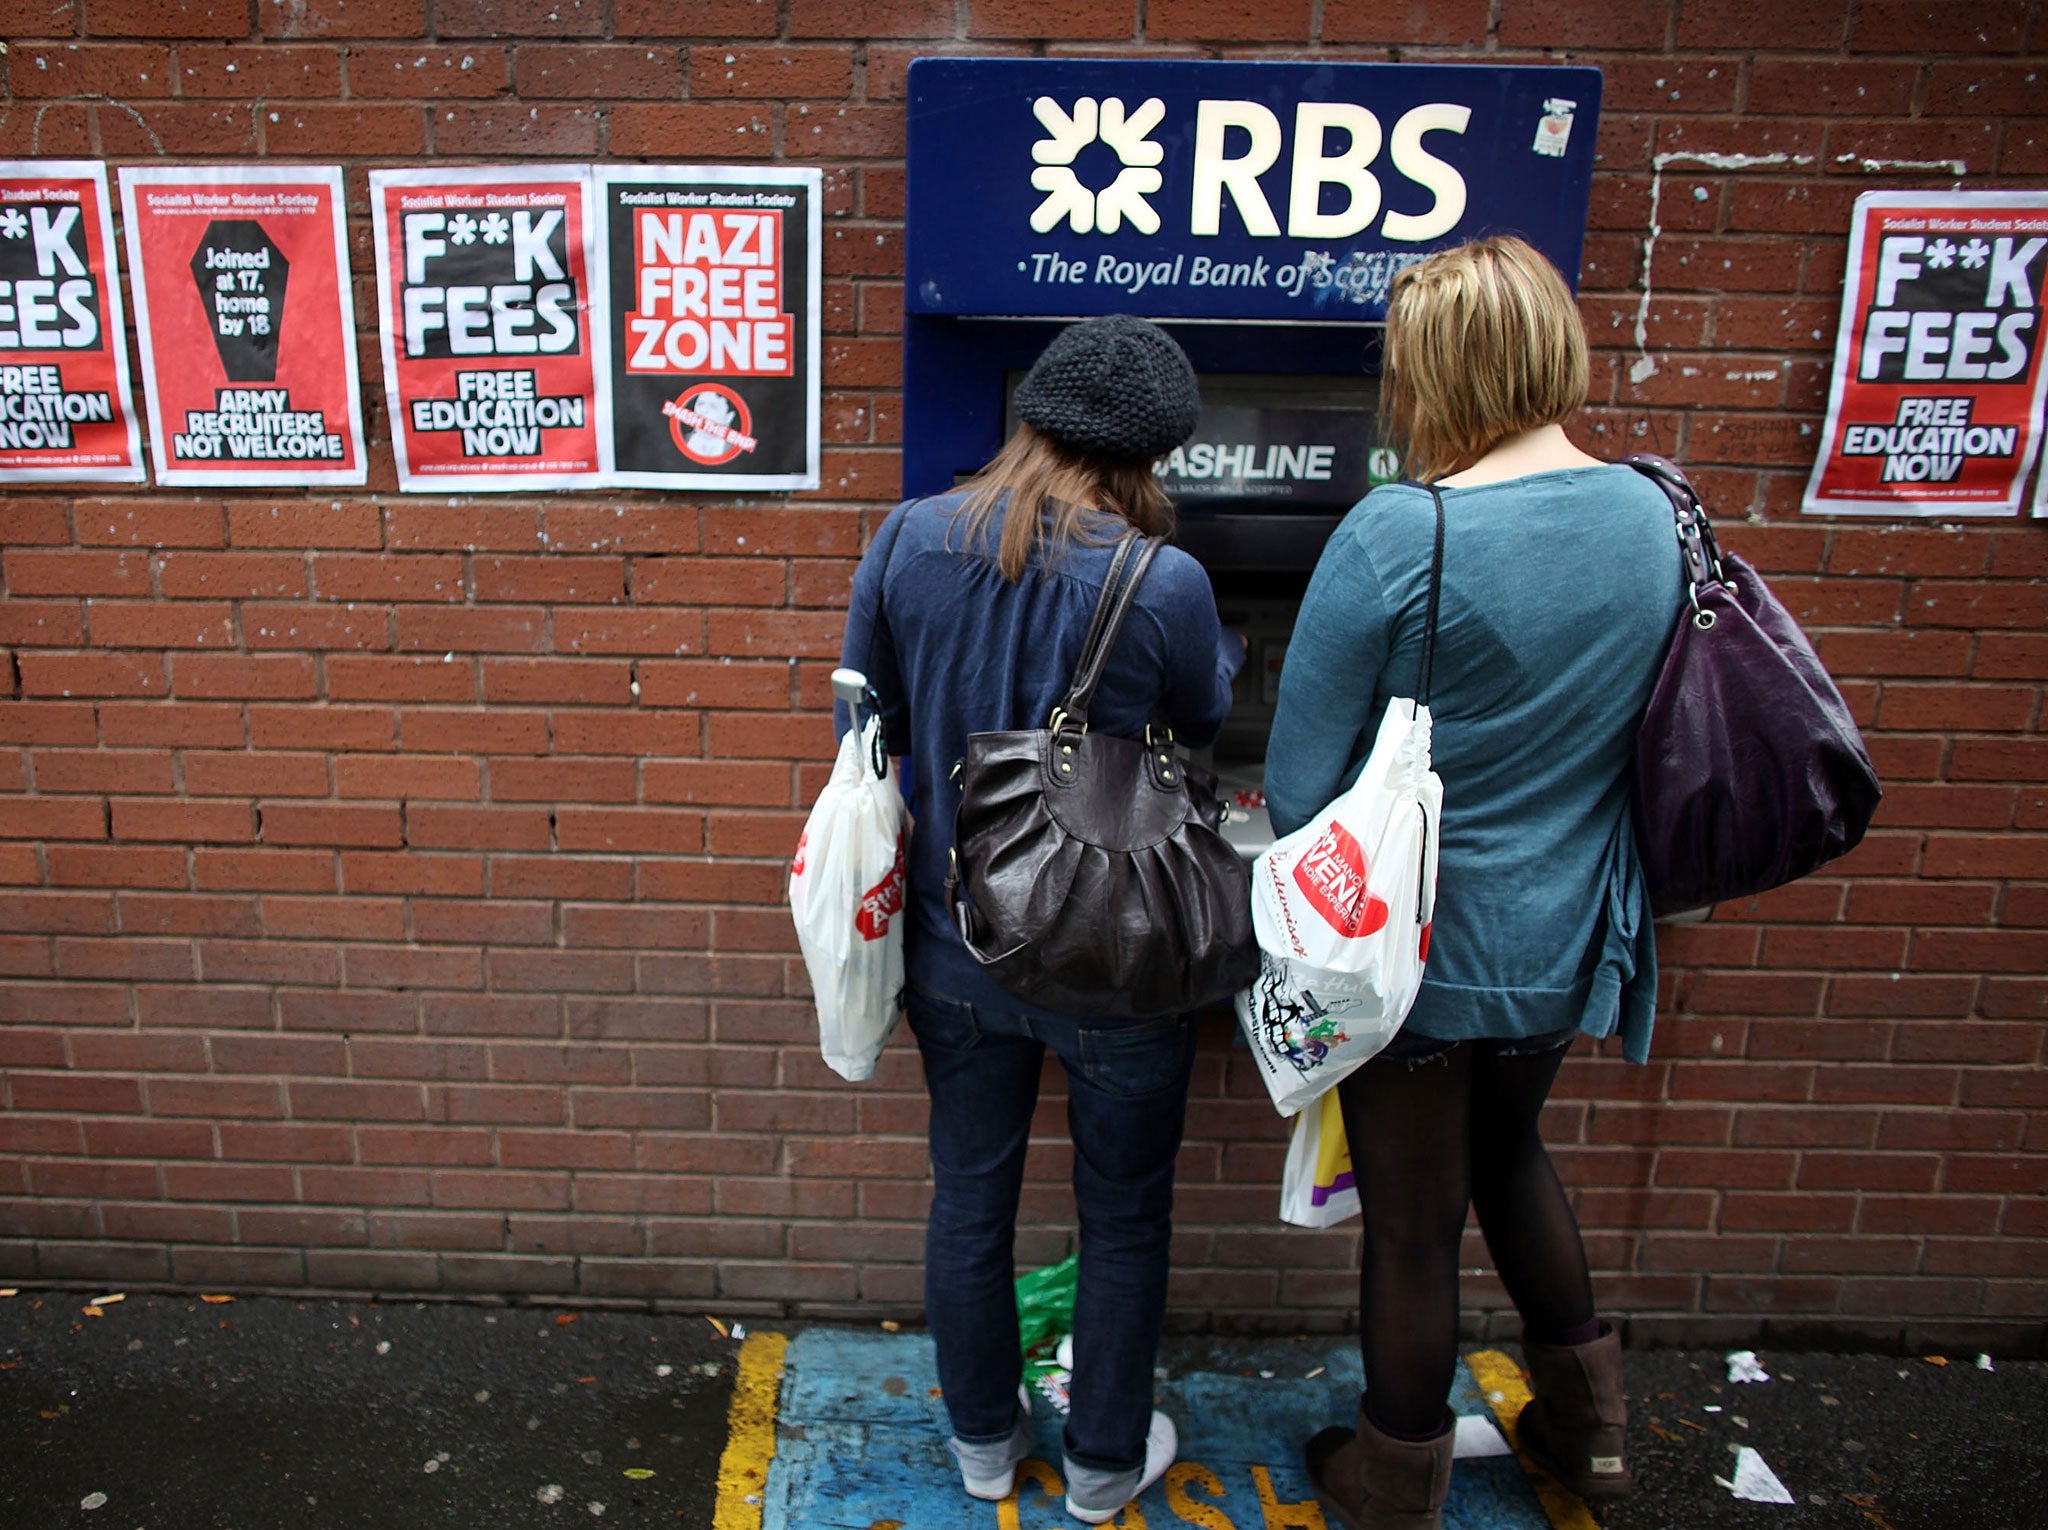 Students arriving for Manchester University's freshers week queue up at a cash machine to draw money on September 22, 2009 in Manchester, England.